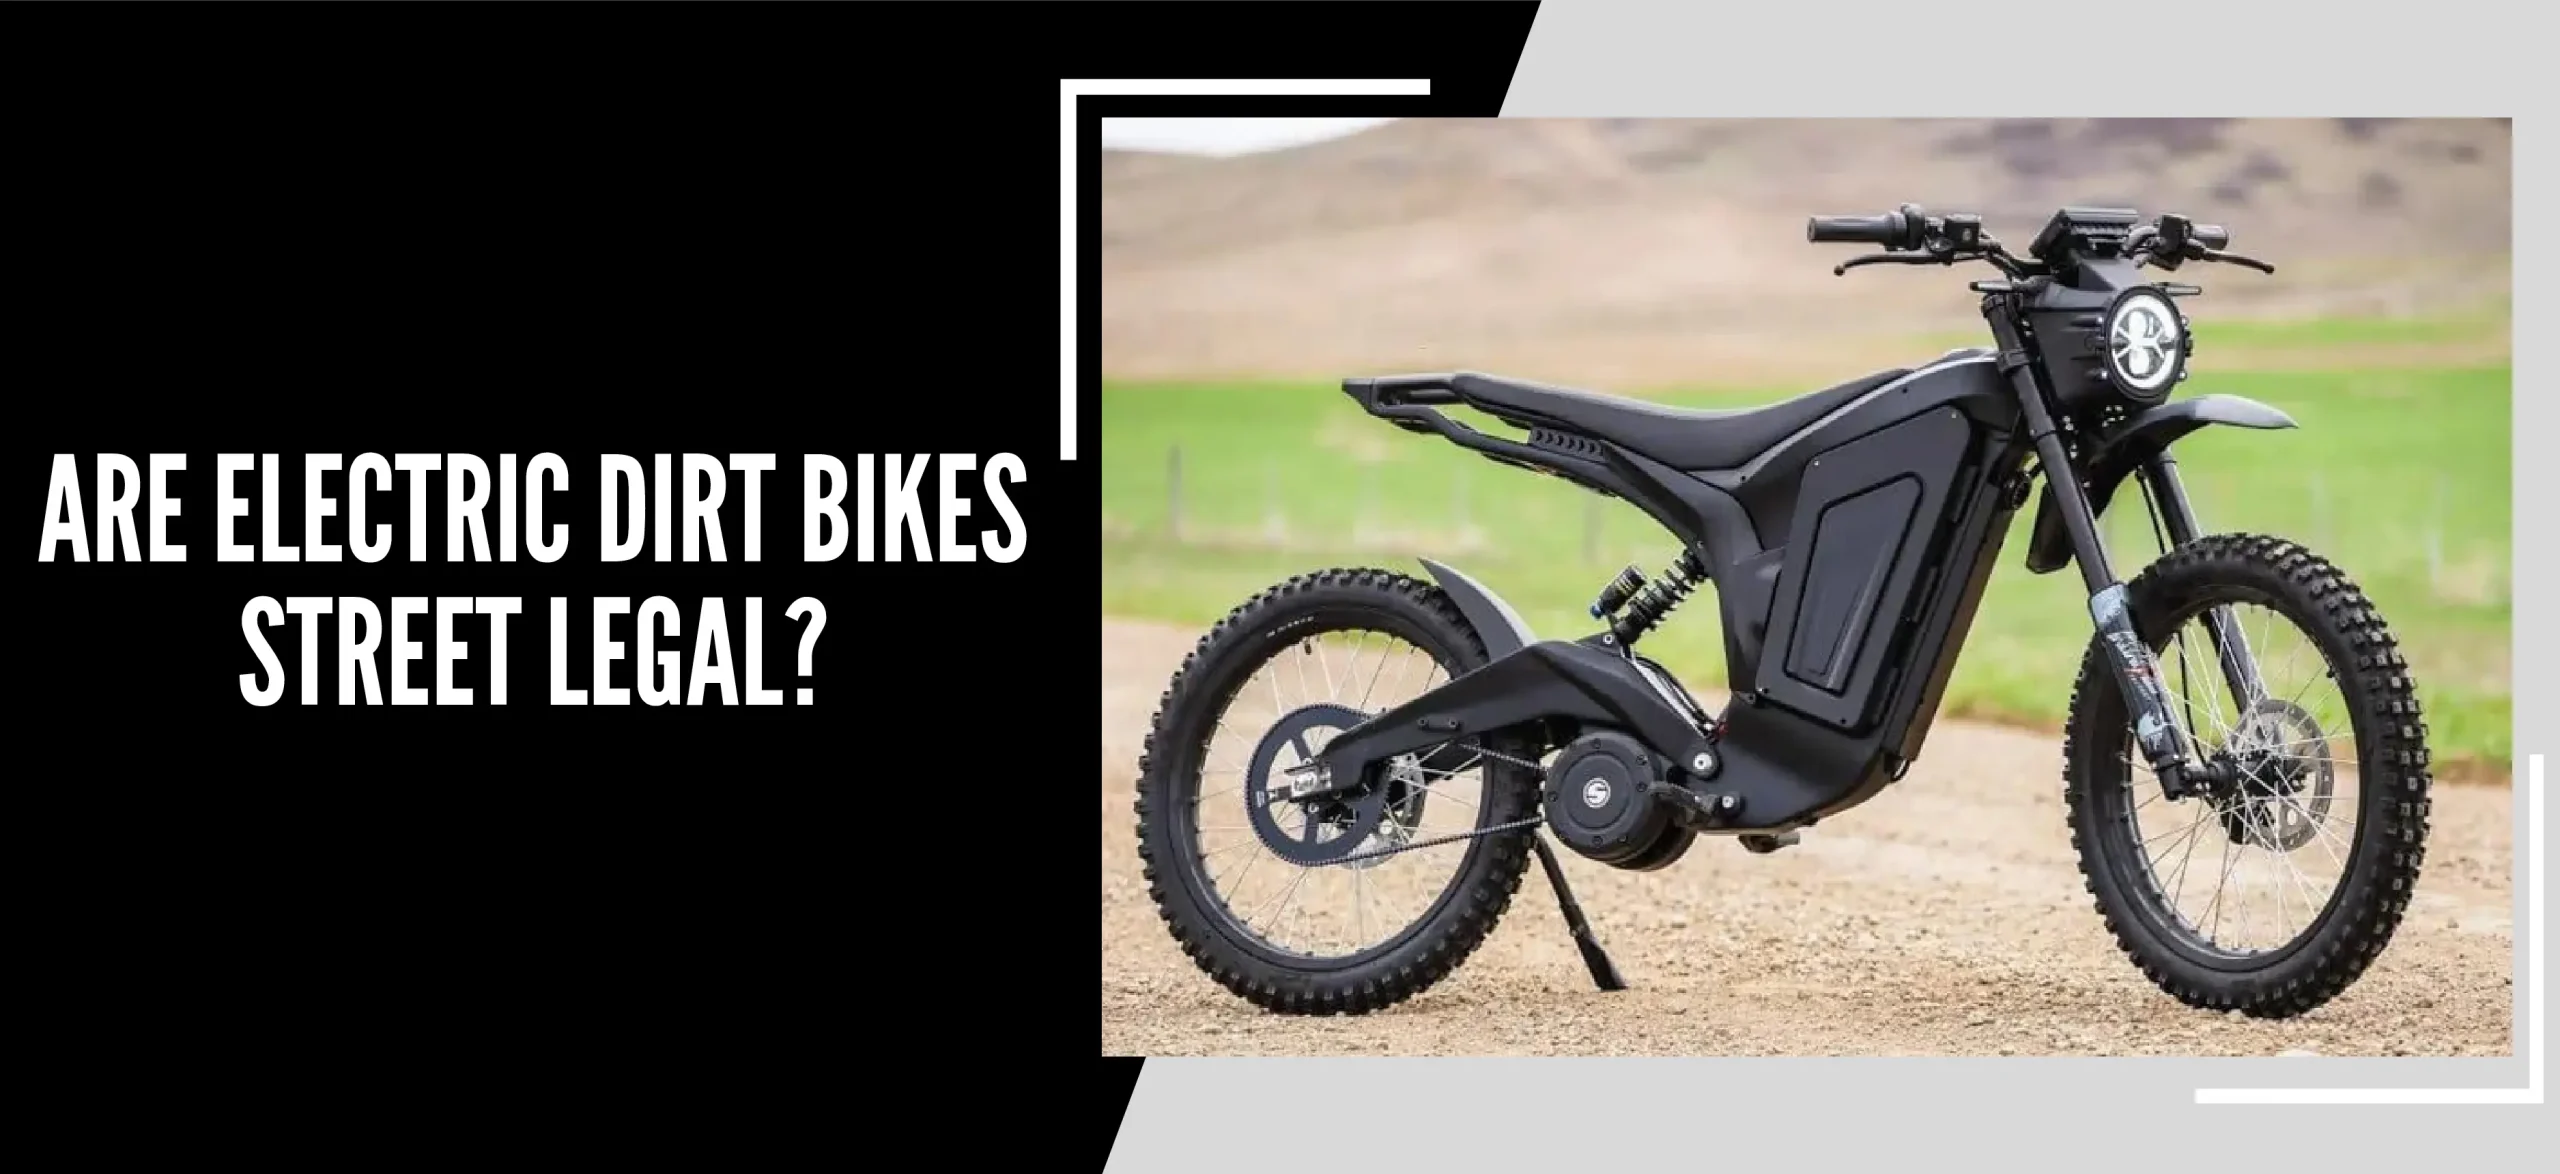 Are Electric Dirt Bikes Street Legal?